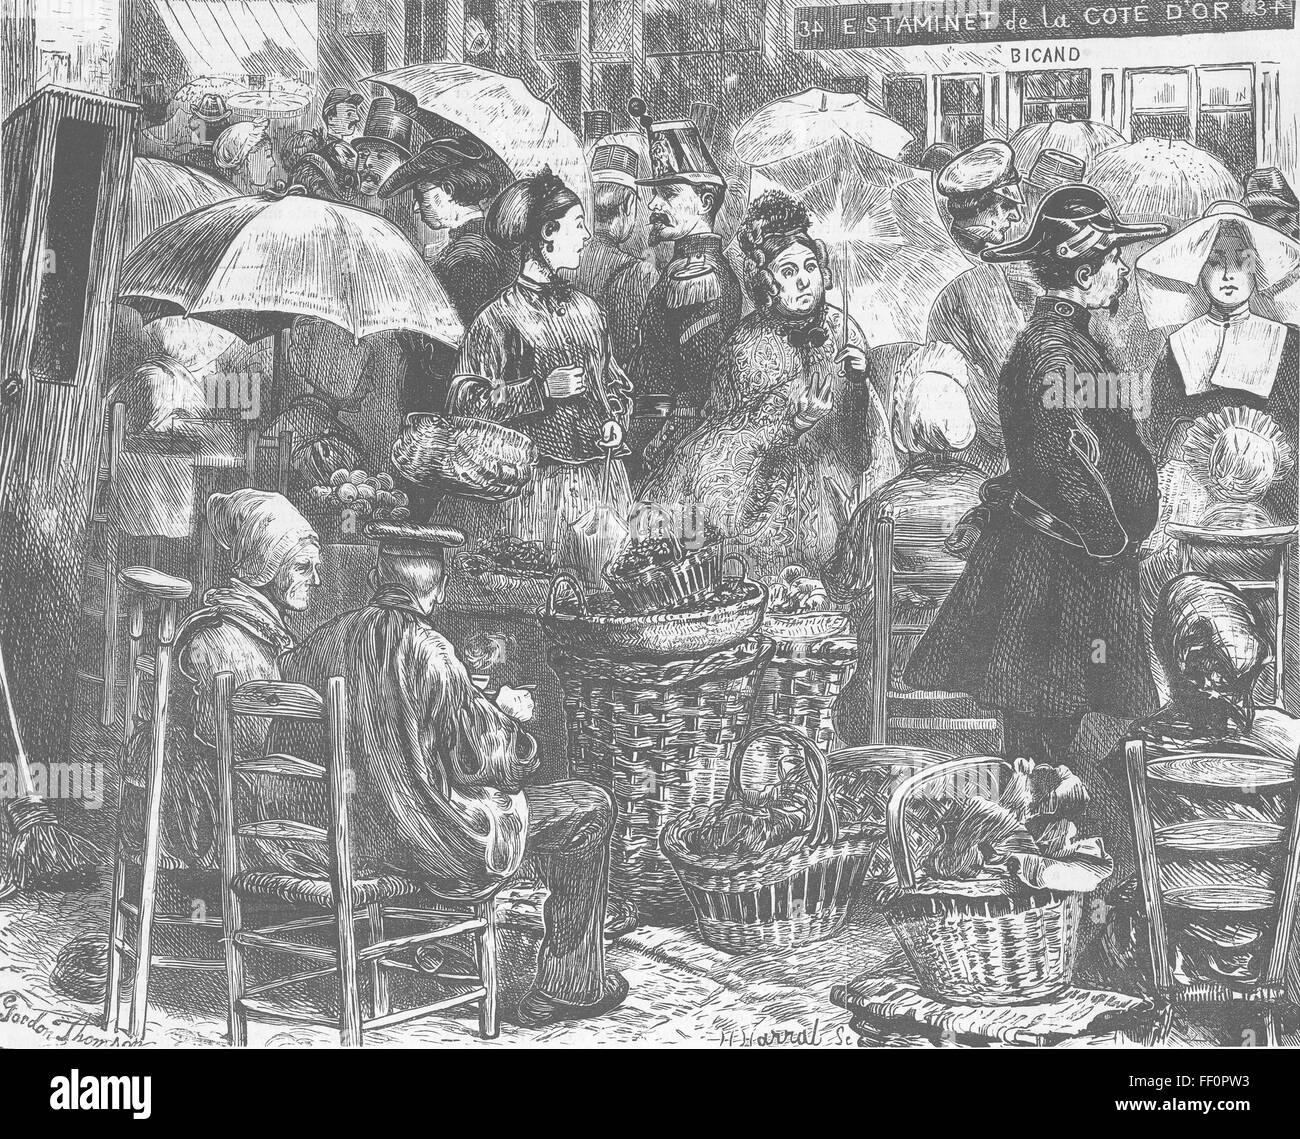 FRANCE Market, Boulogne 1870. The Graphic Stock Photo